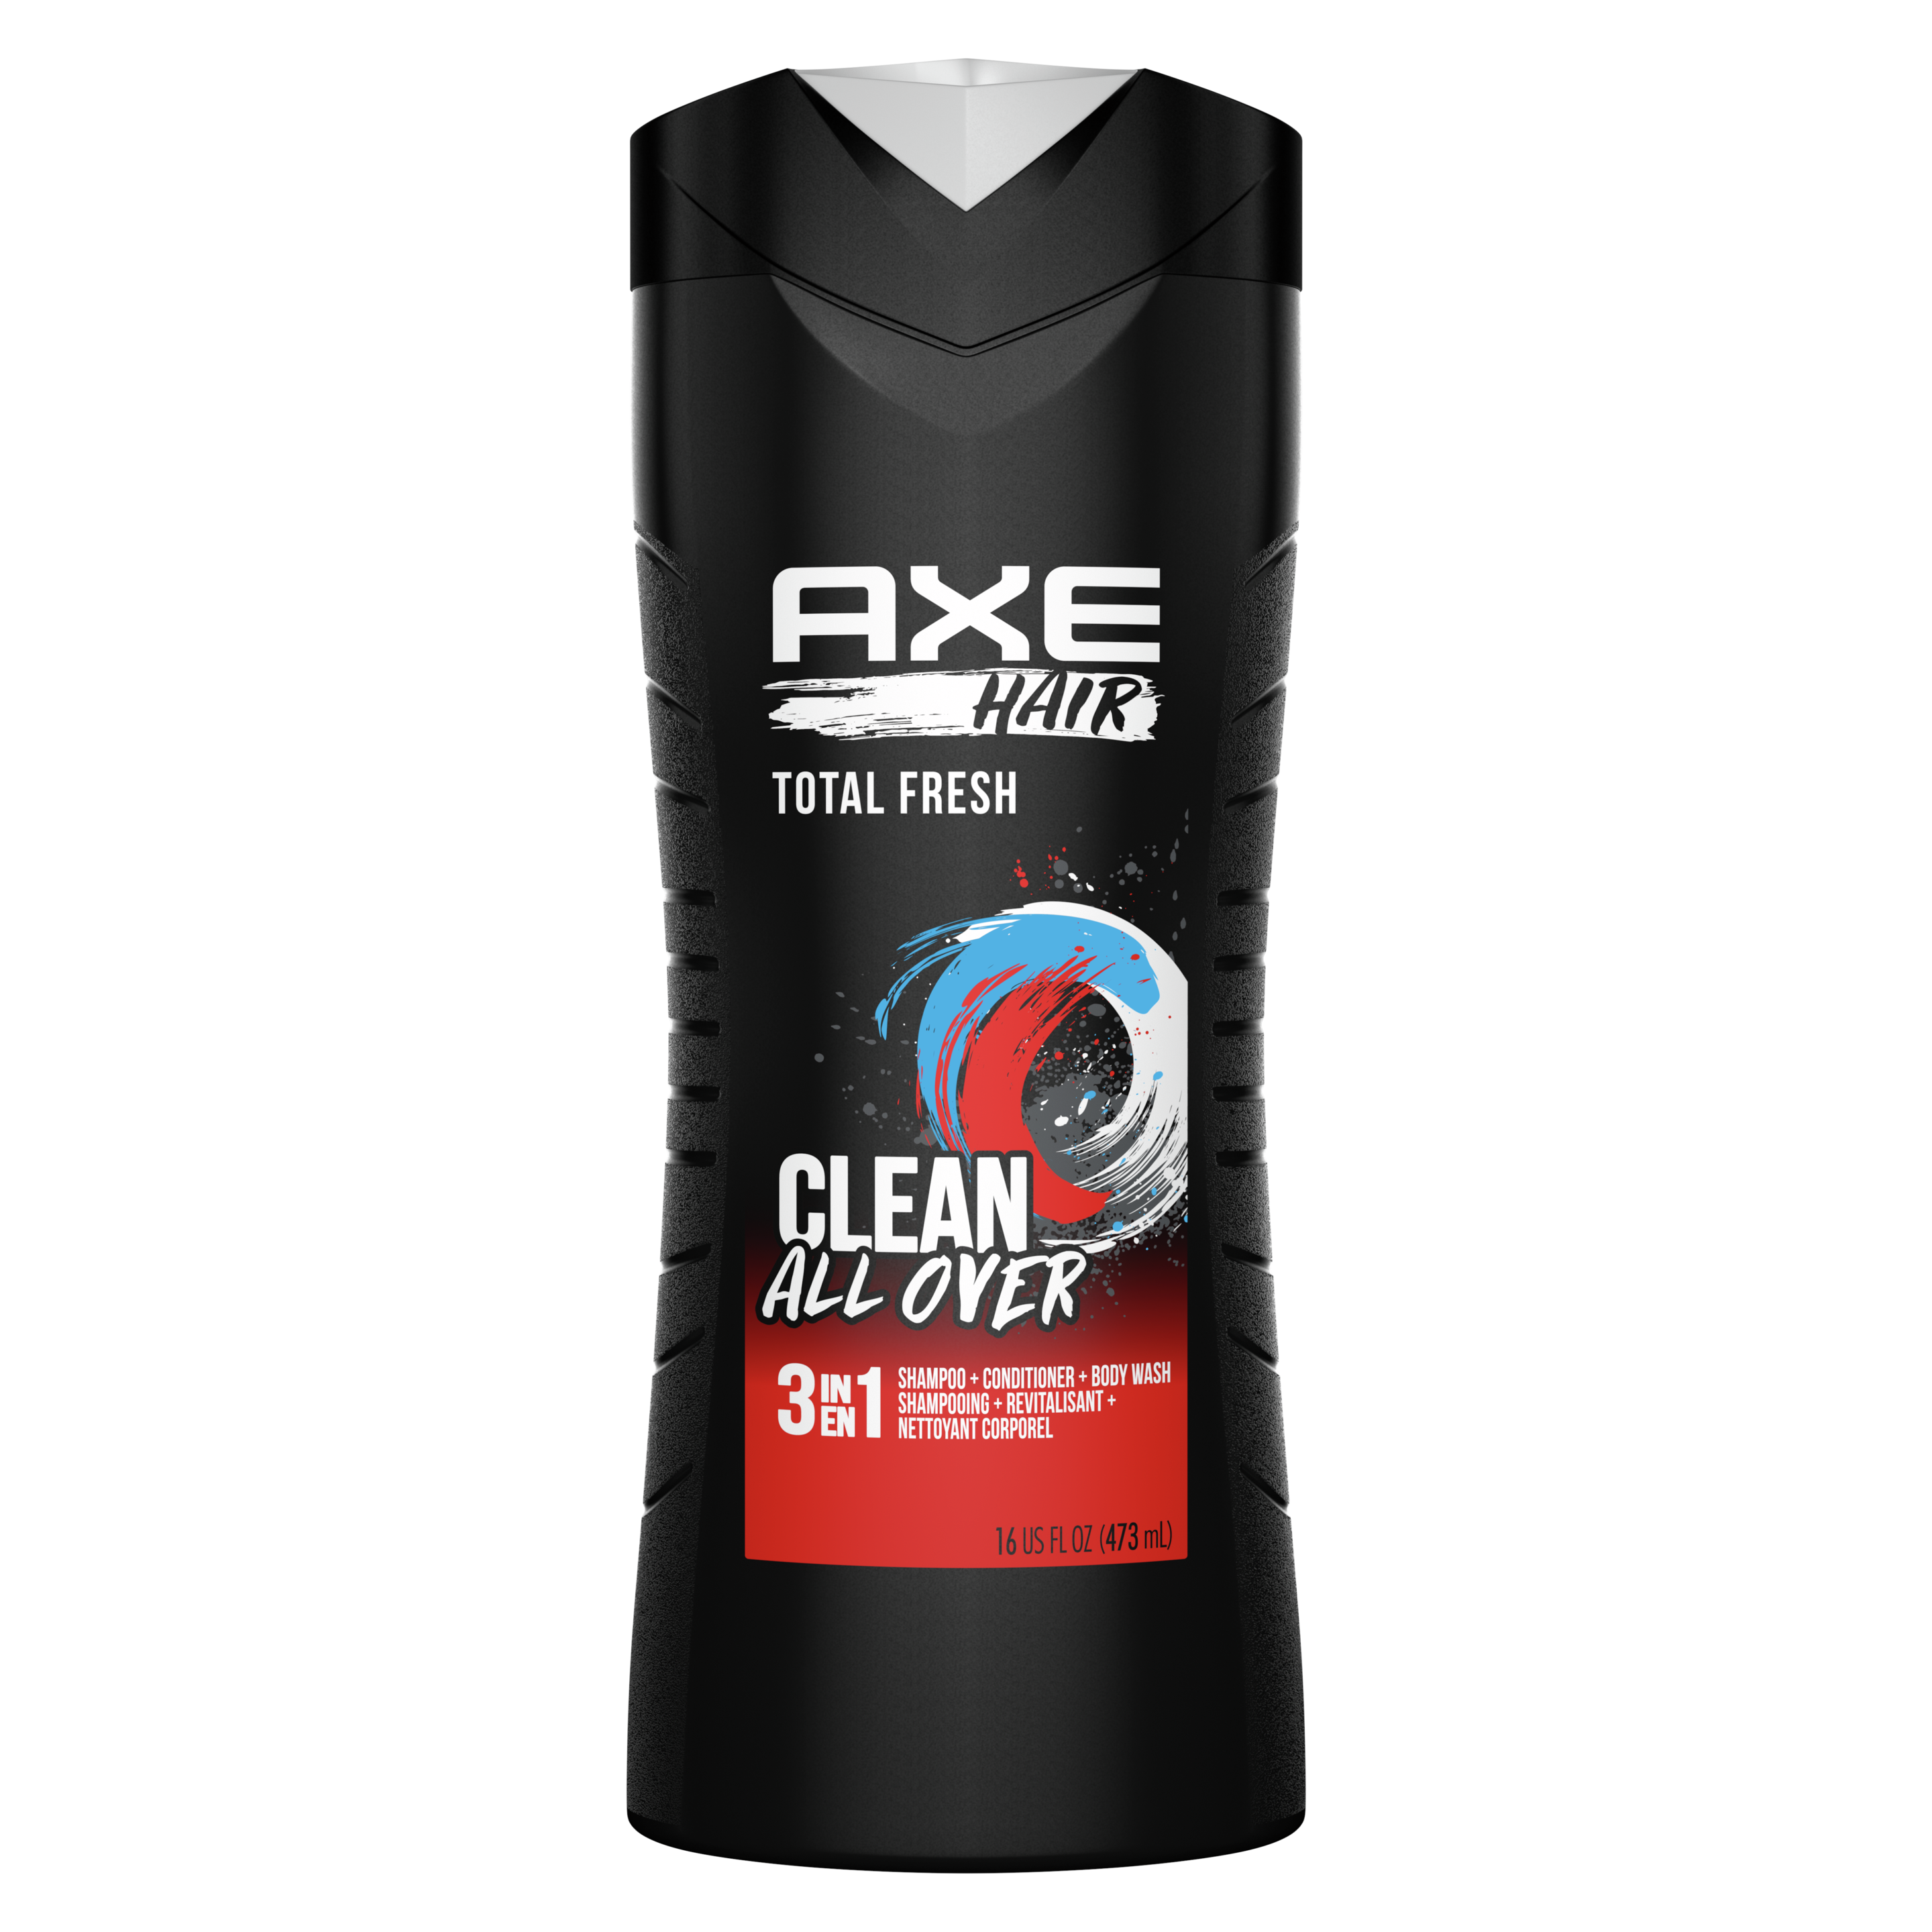 AXE Hair Total Fresh 3-in-1 Shampoo, Conditioner and Body Wash